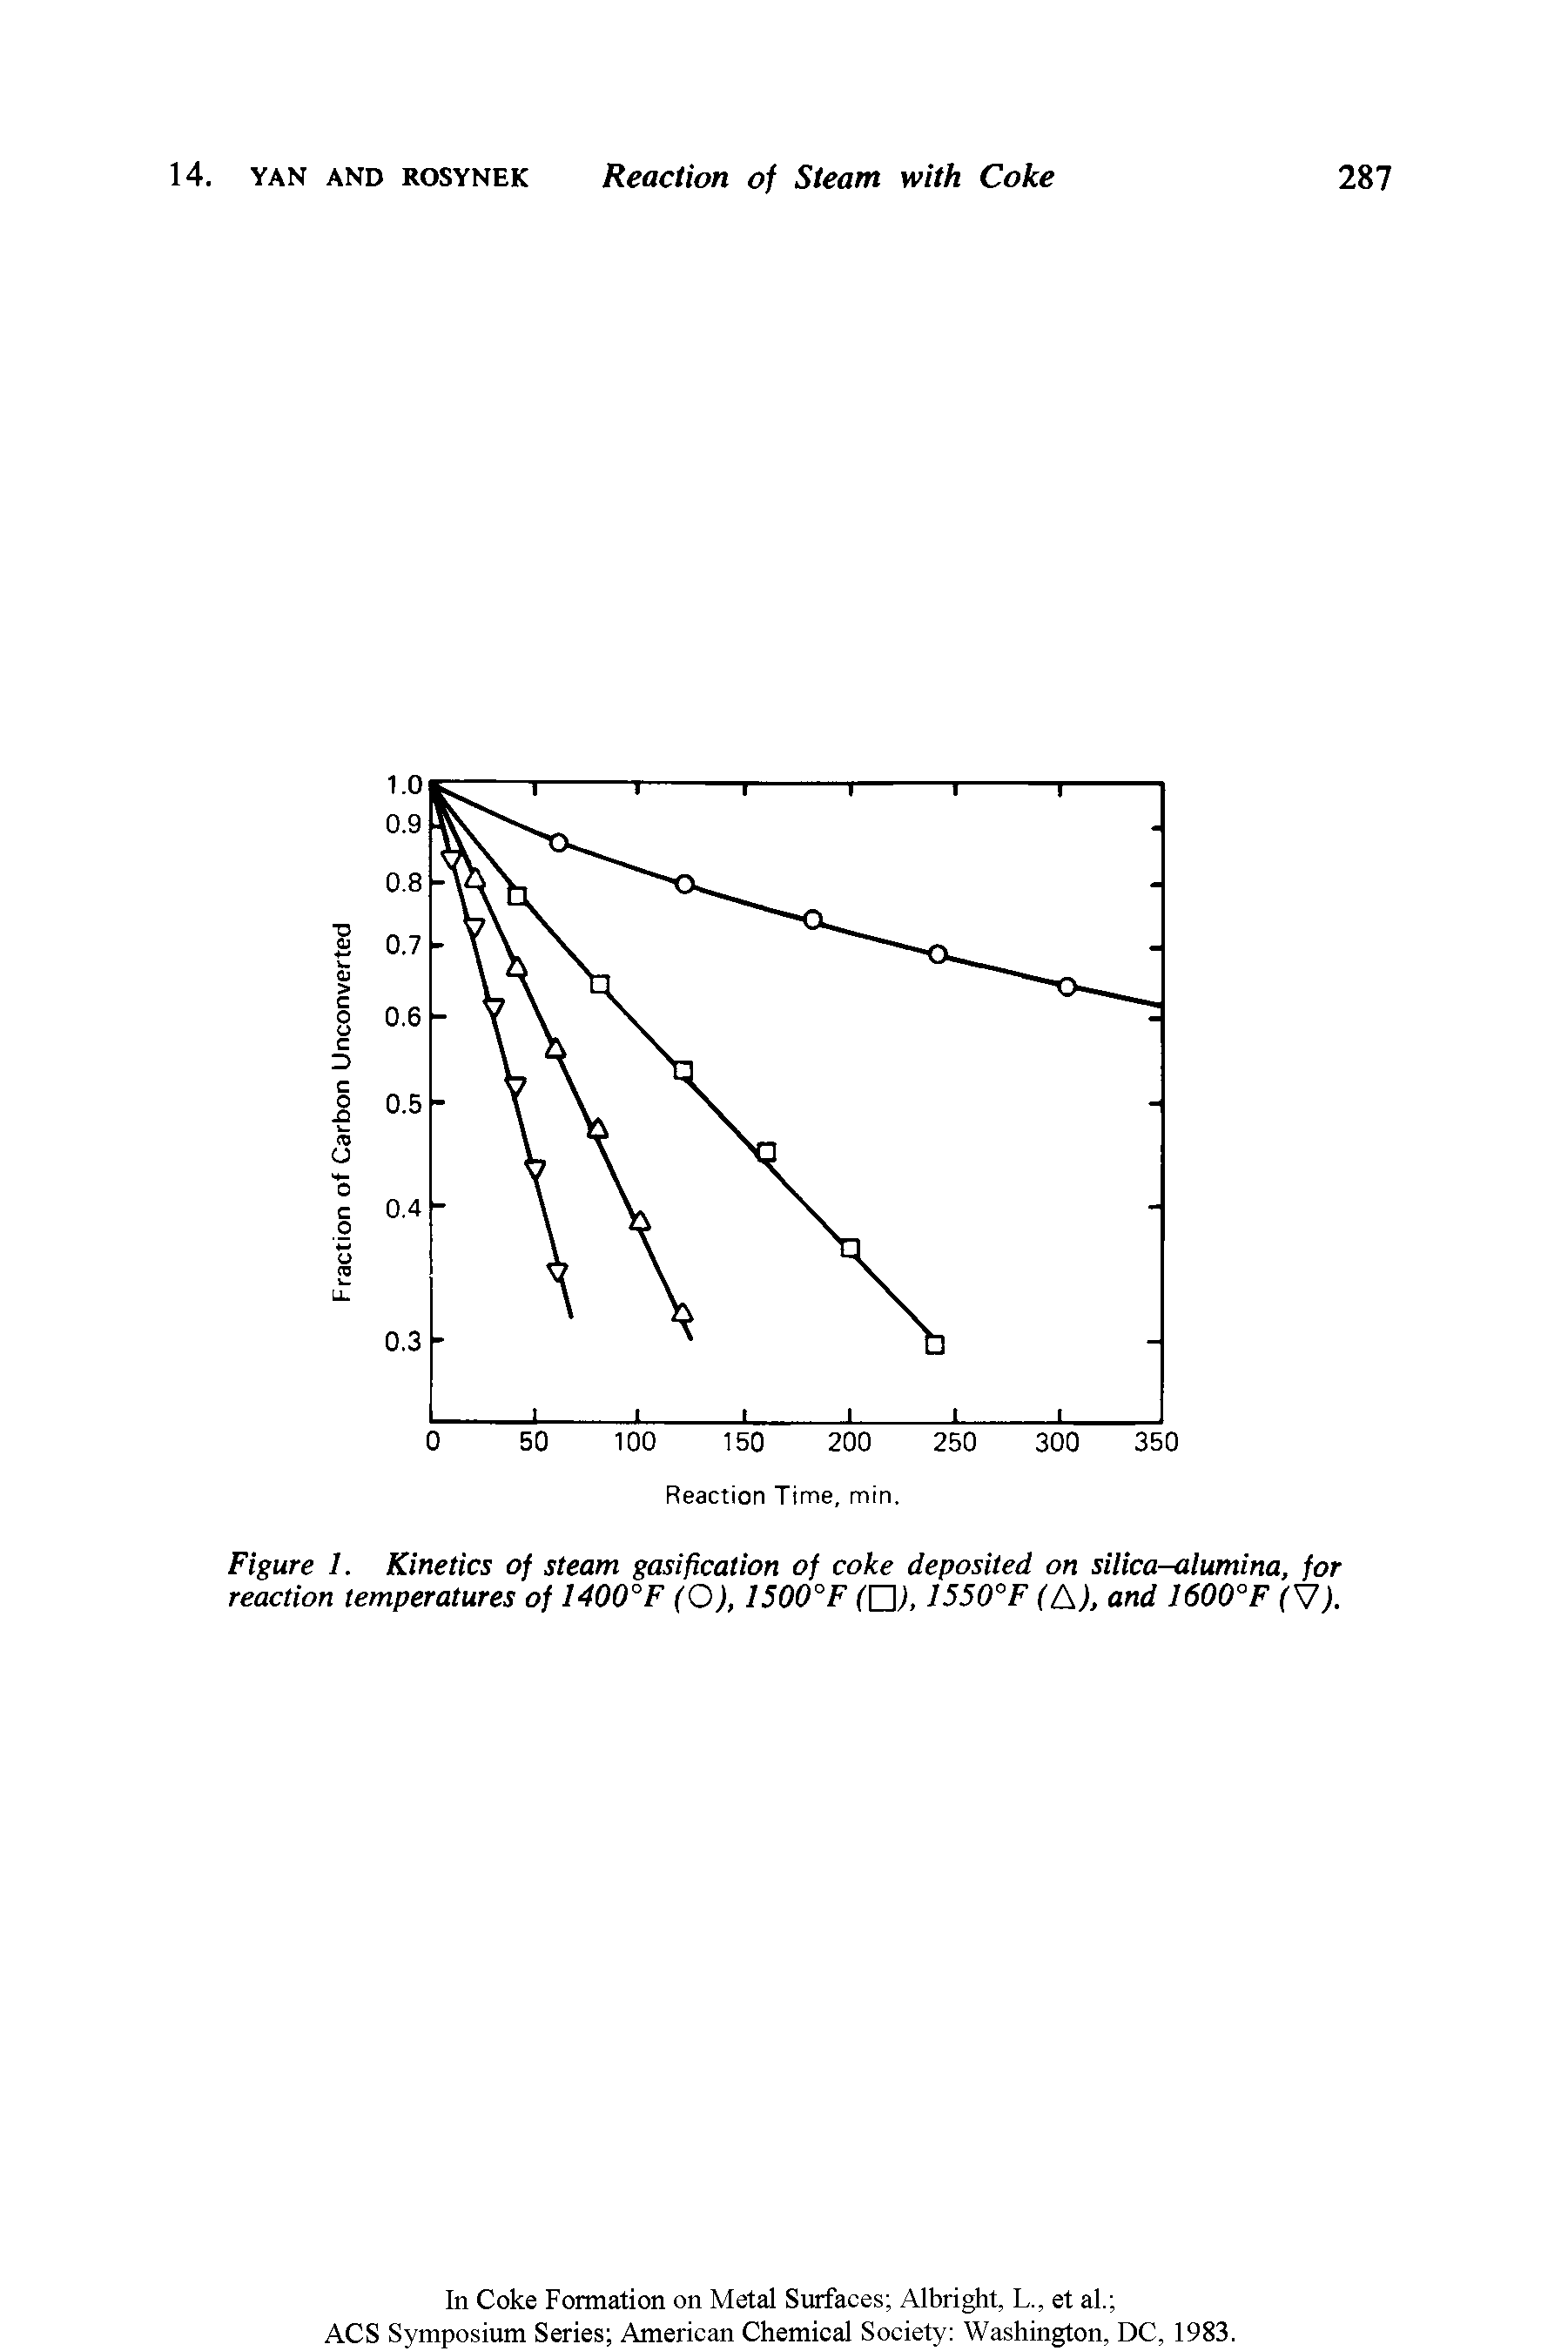 Figure 1. Kinetics of steam gasification of coke deposited on silica-alumina, for reaction temperatures of 1400°F (O), 1500°F ( Z ), 1550°F (A), and 1600°F (V).